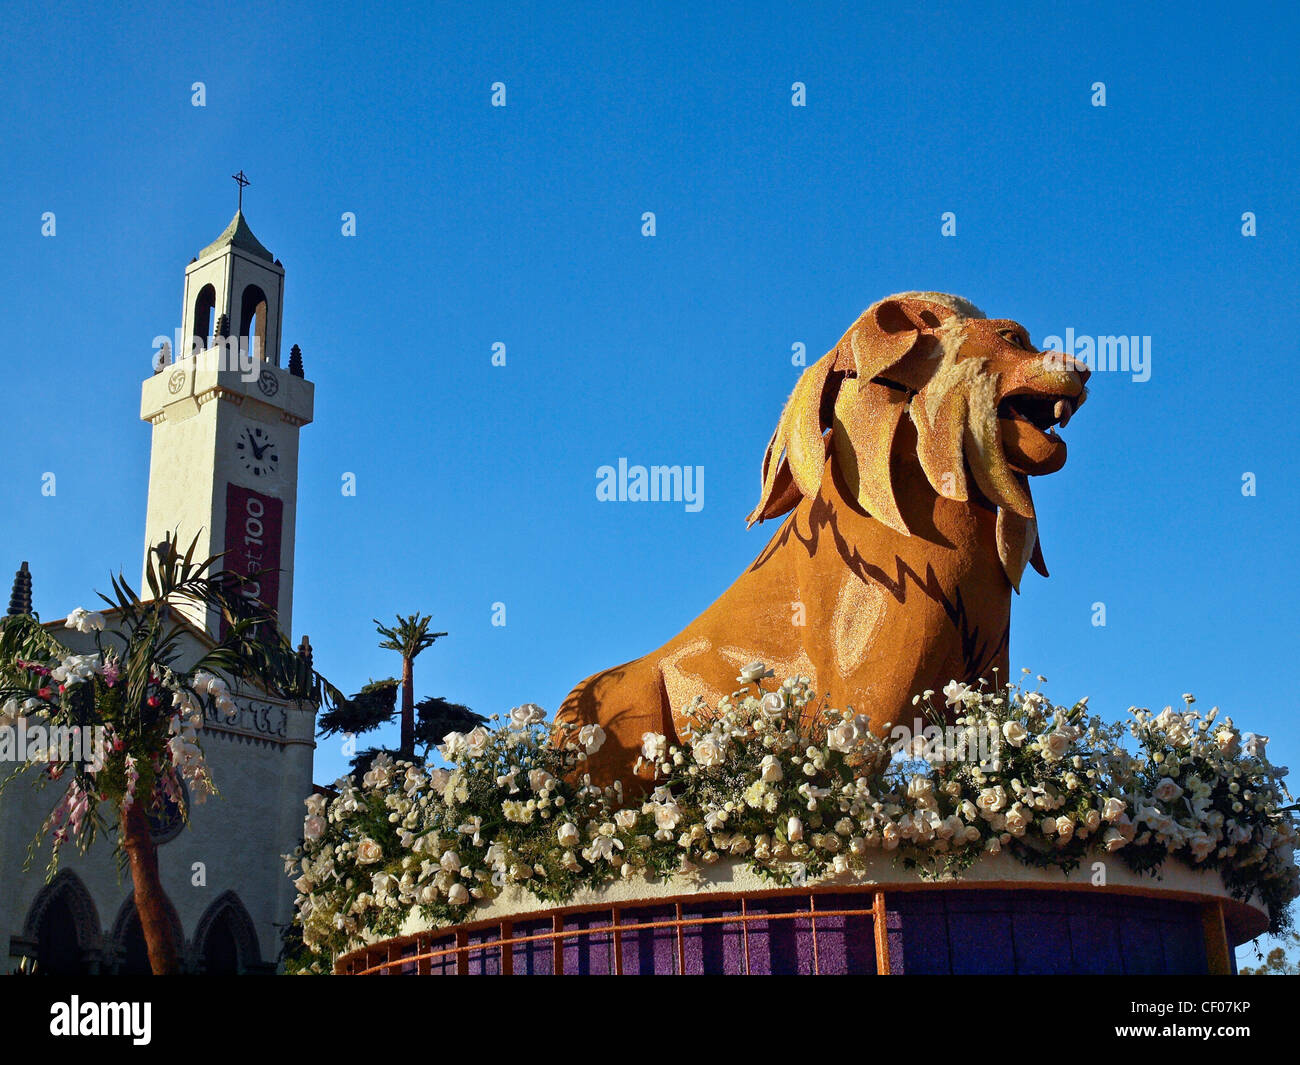 The 2012 Rose Parade float from Loyola Marymount University features their mascot Lion and the Regents Bell Tower. Stock Photo